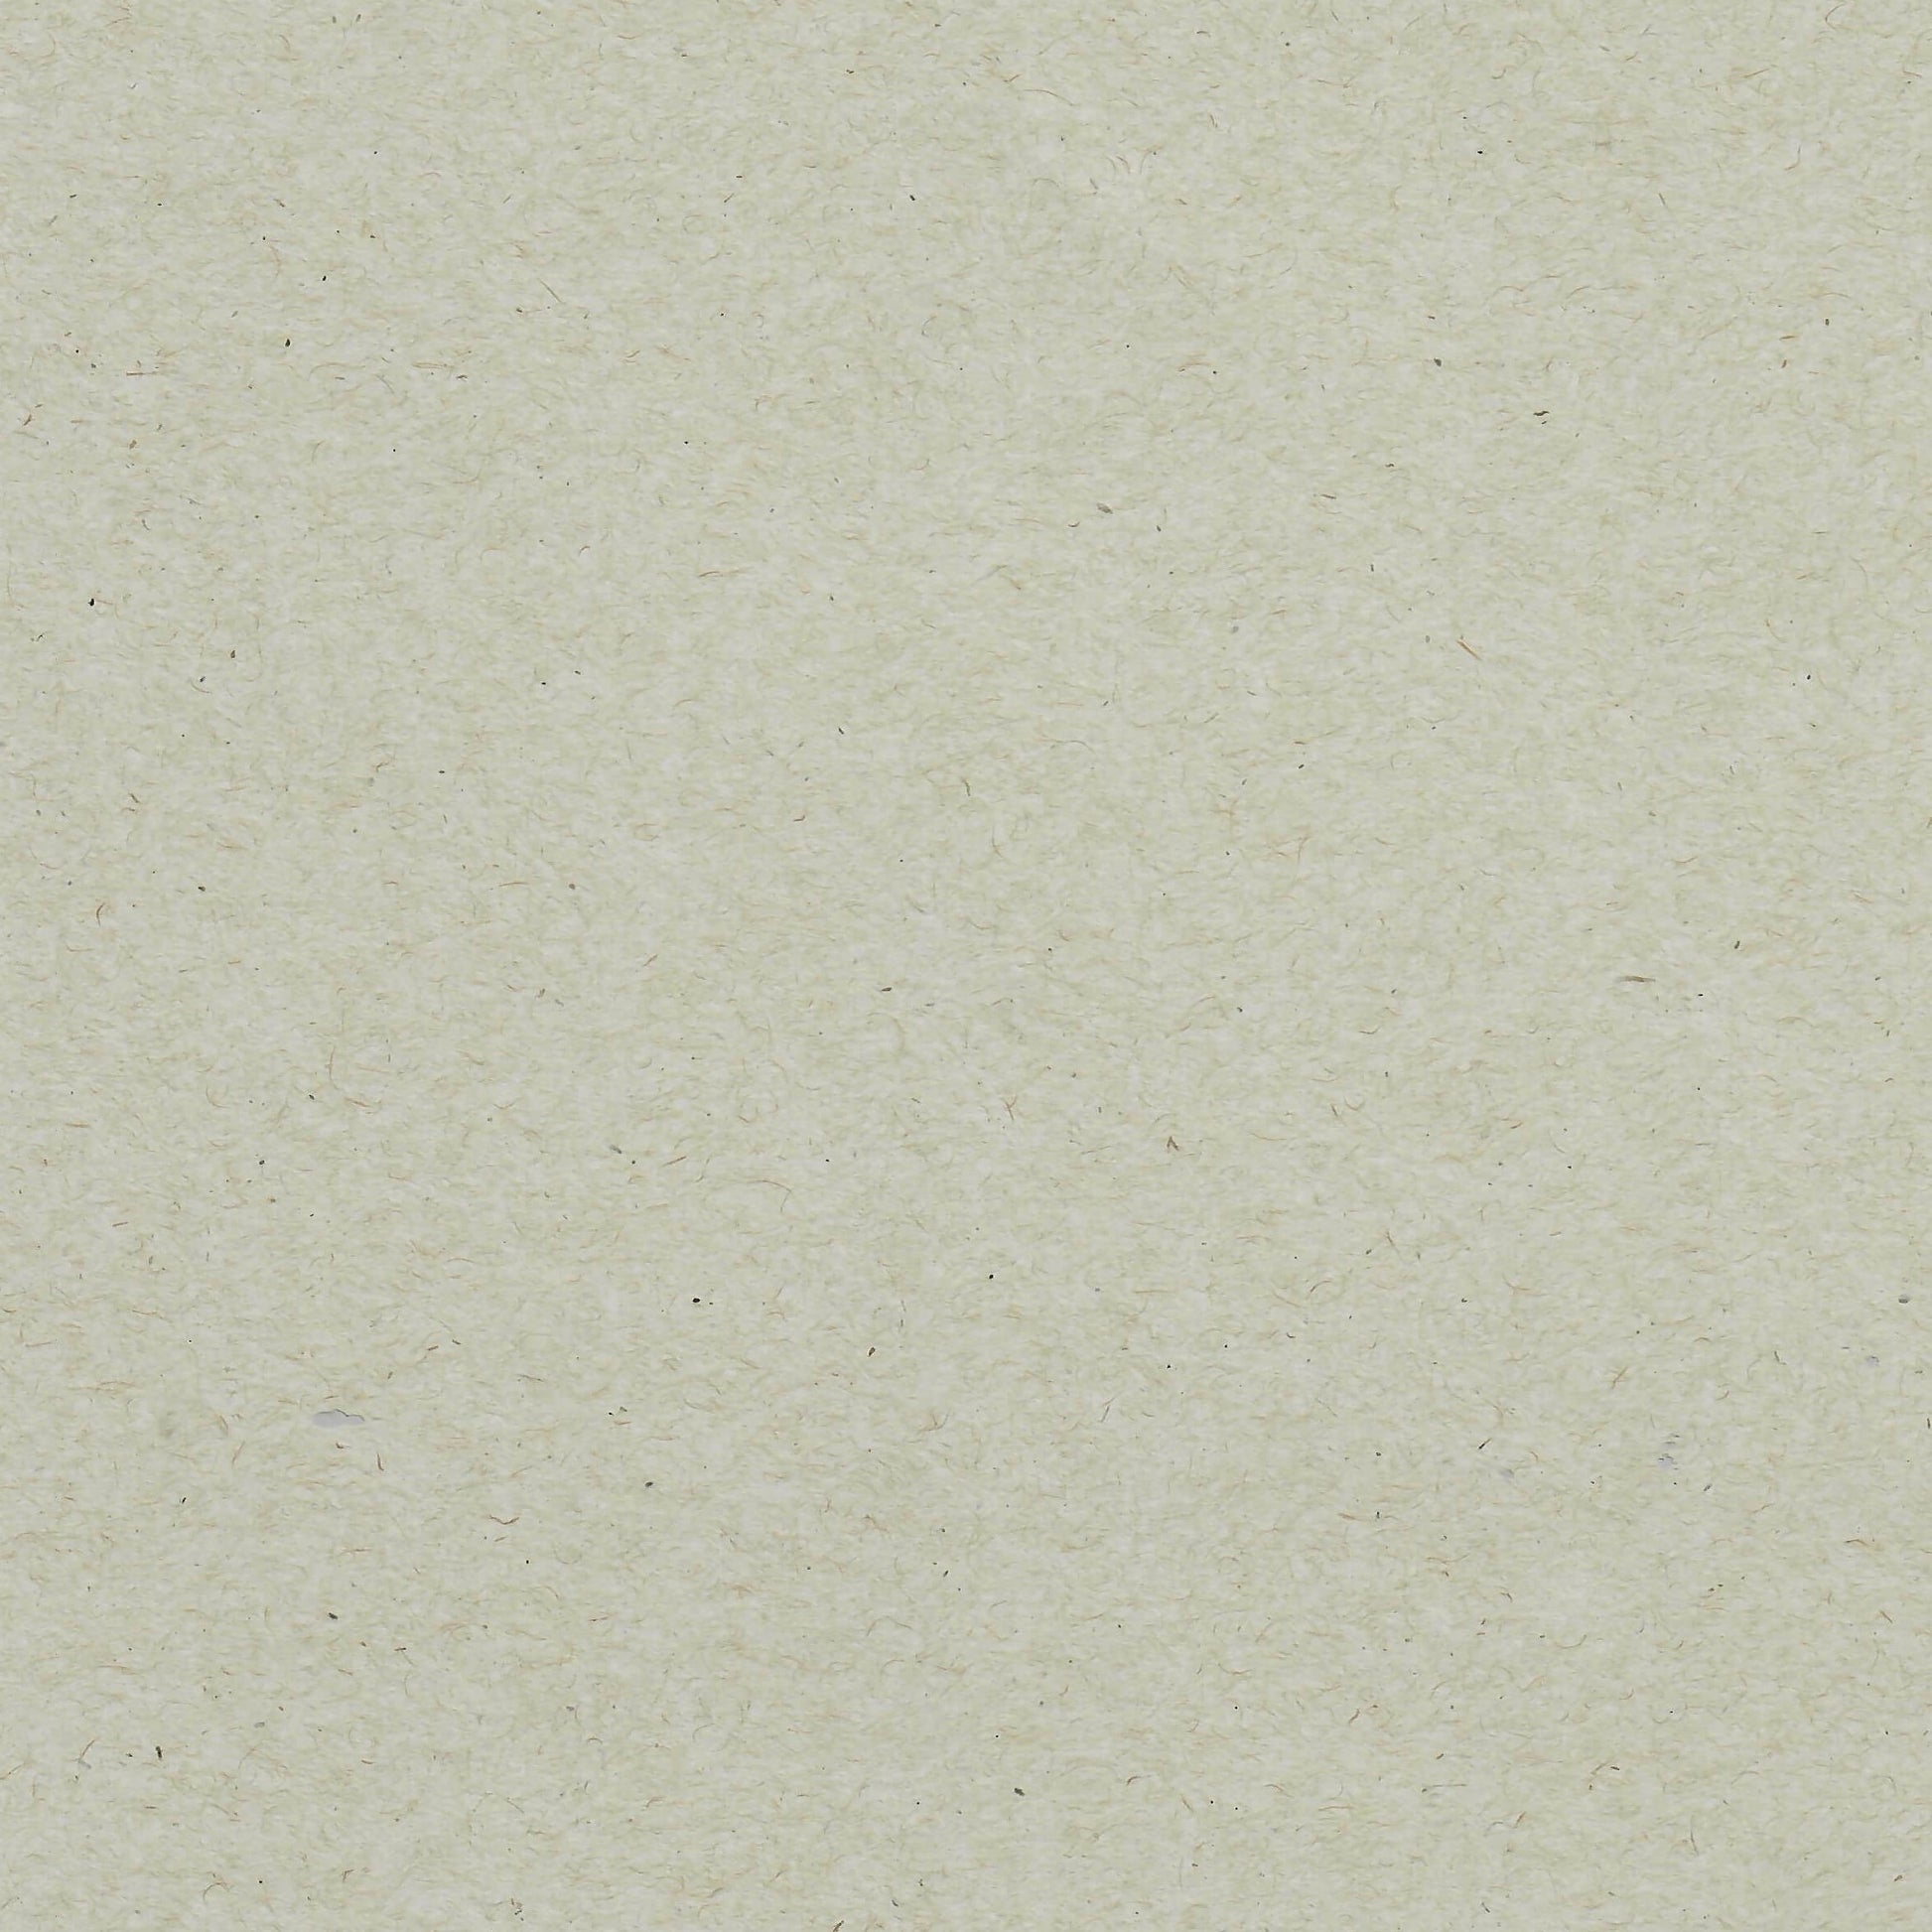 Grout Gray Cardstock - Cover Weight Paper - Construction – French Paper